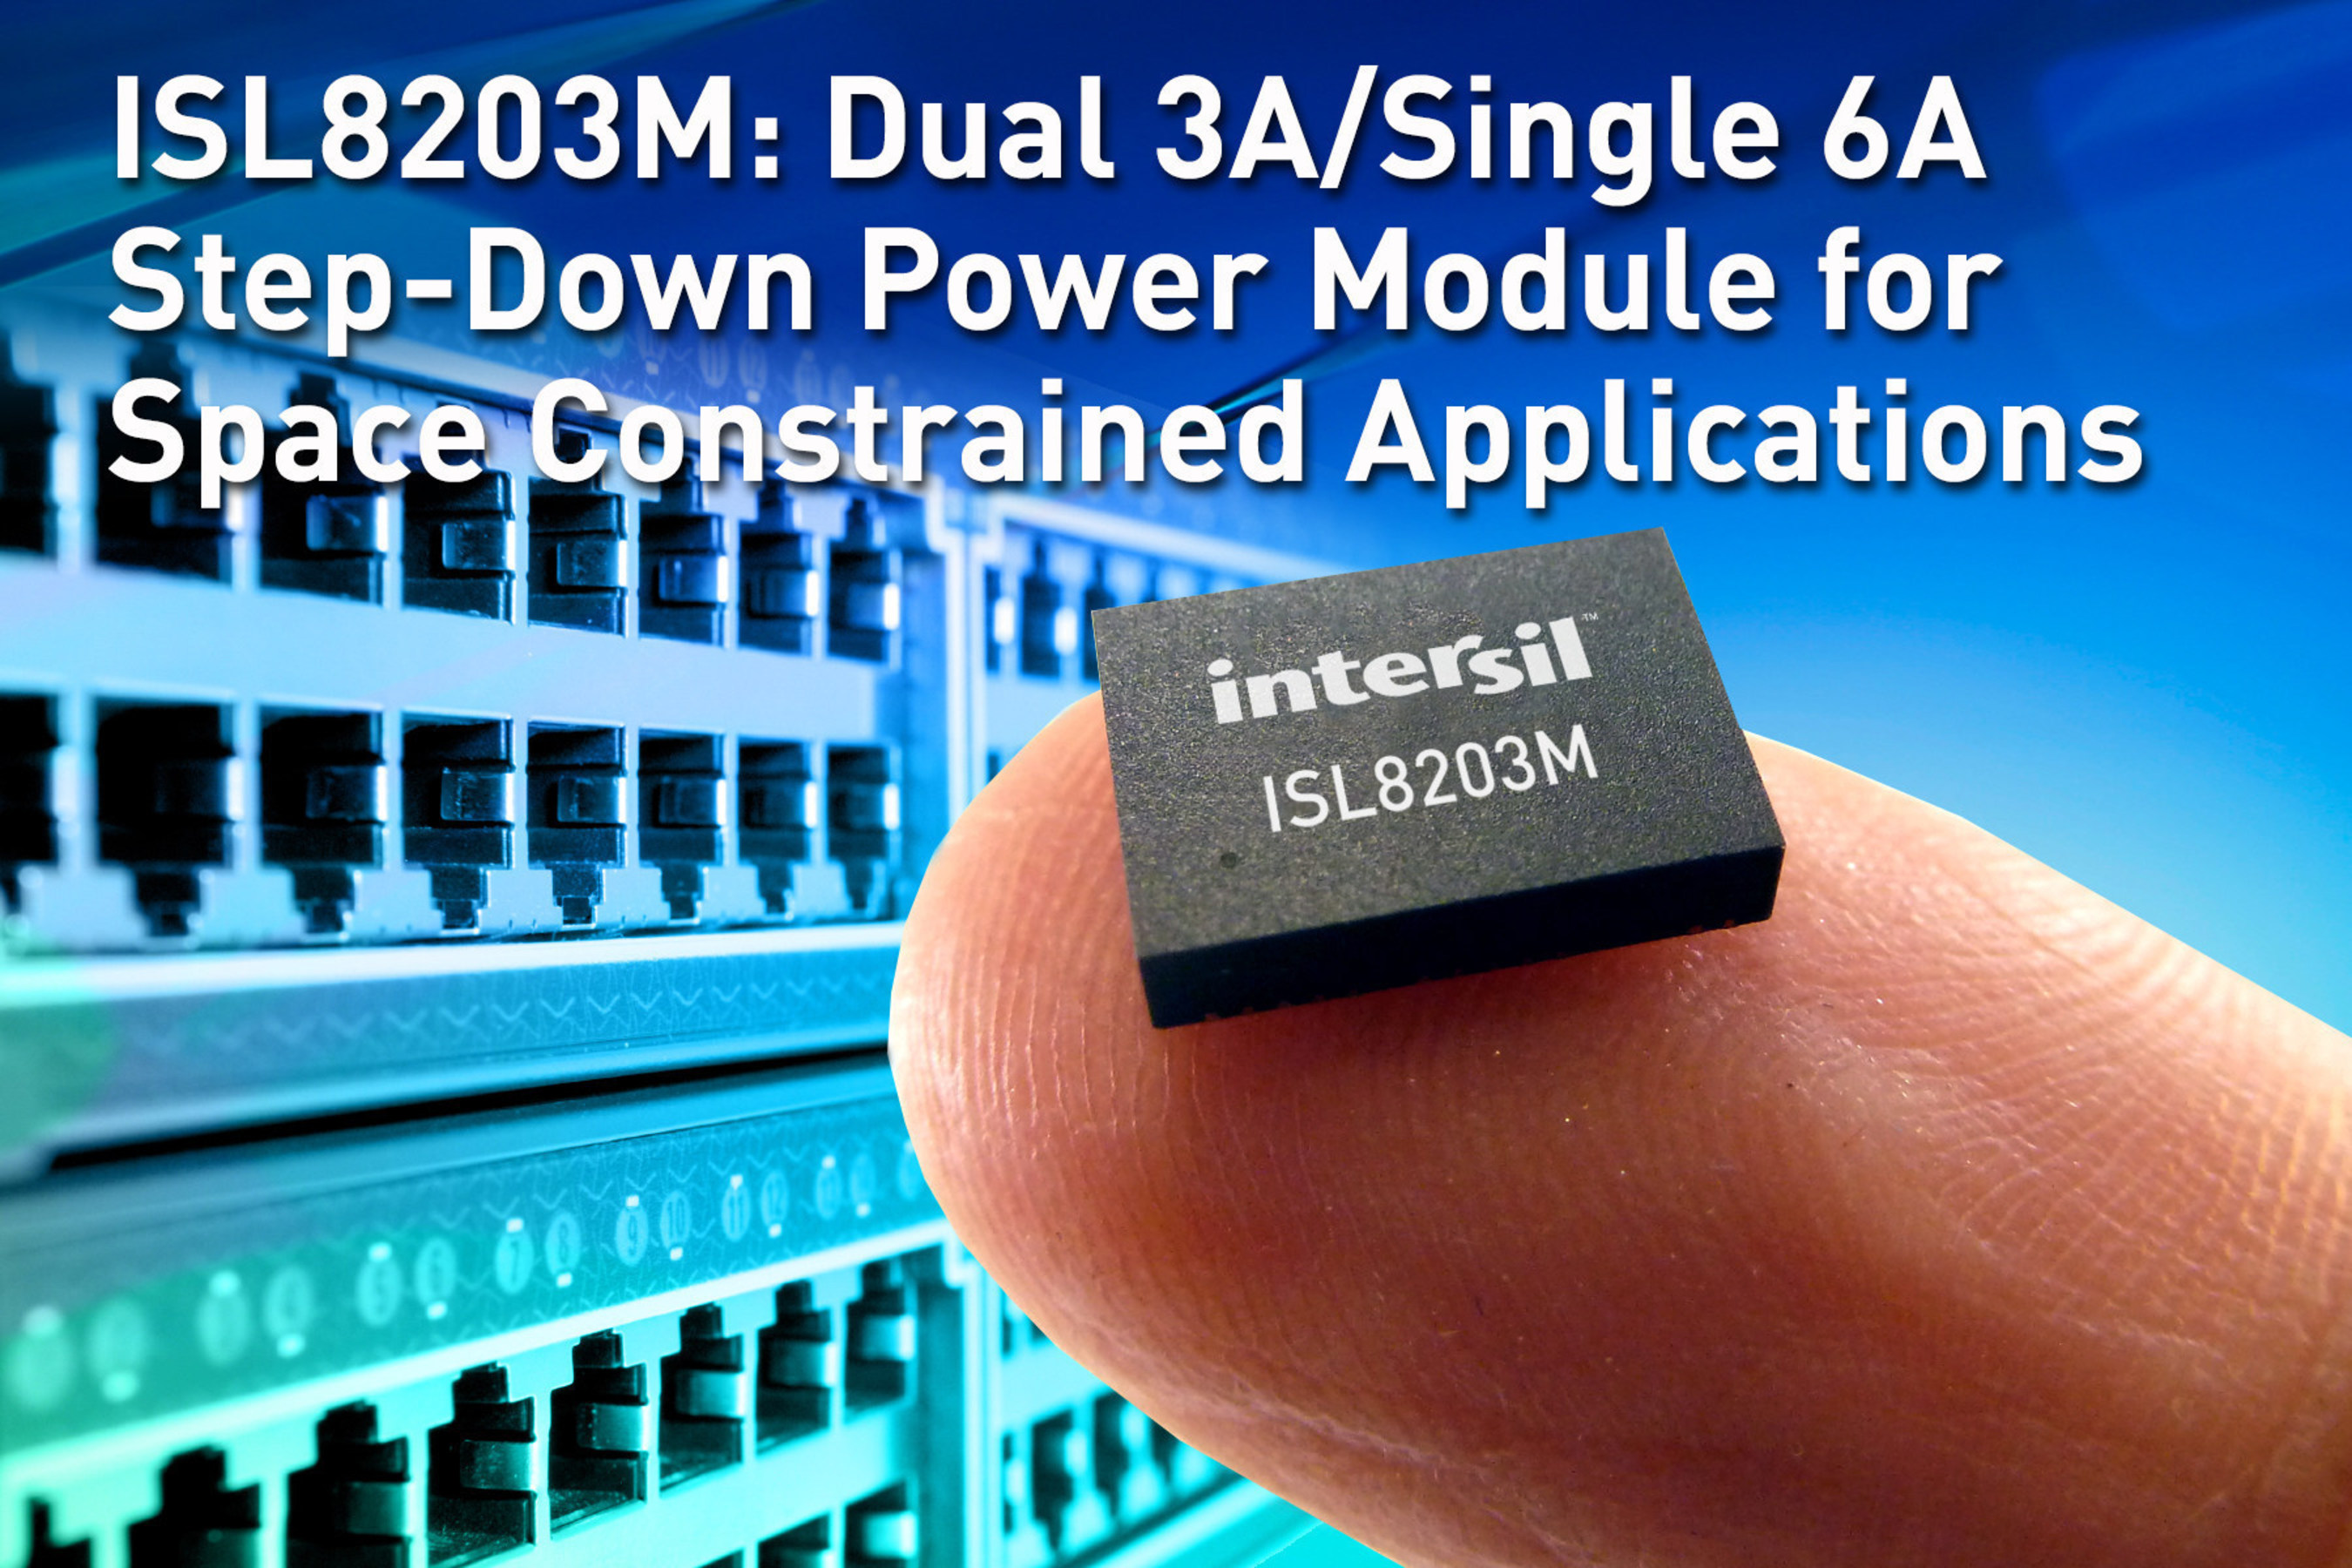 Intersil's ISL8203M delivers compact solution size, high power density and efficiency for infrastructure and industrial applications